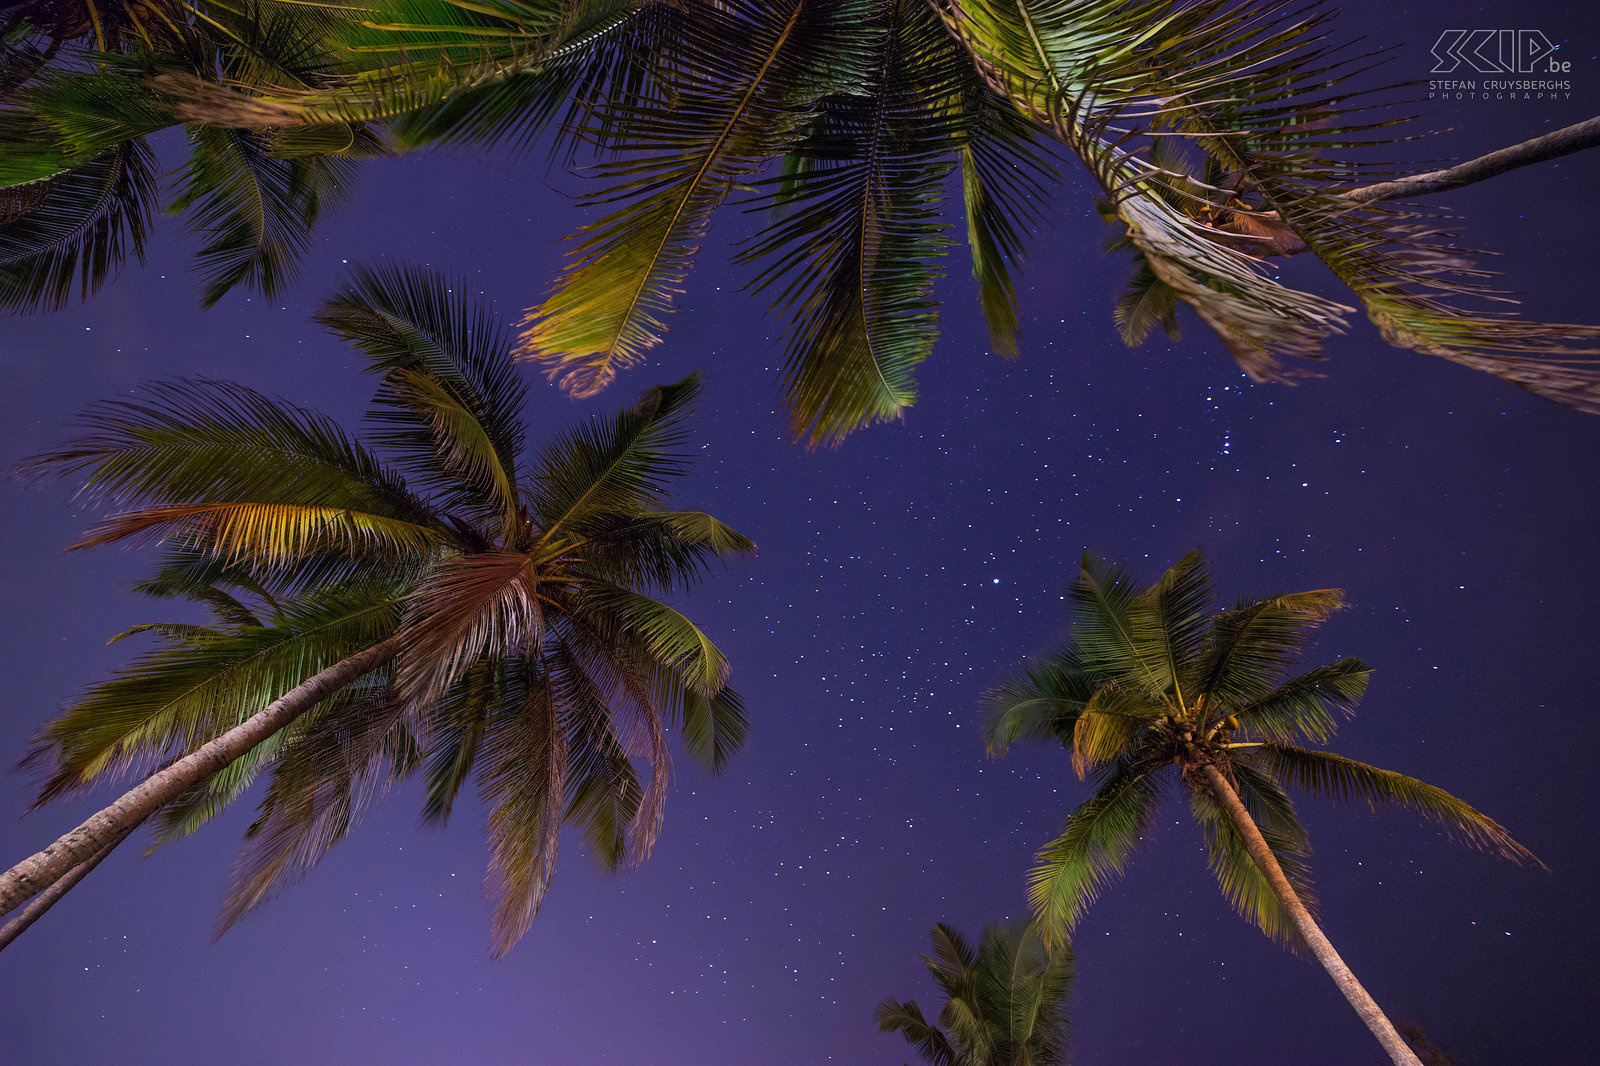 Varca - Palm trees under starry sky One of my last photos of our trip through southern India; tropical palmtrees under a wonderful starry sky. Stefan Cruysberghs